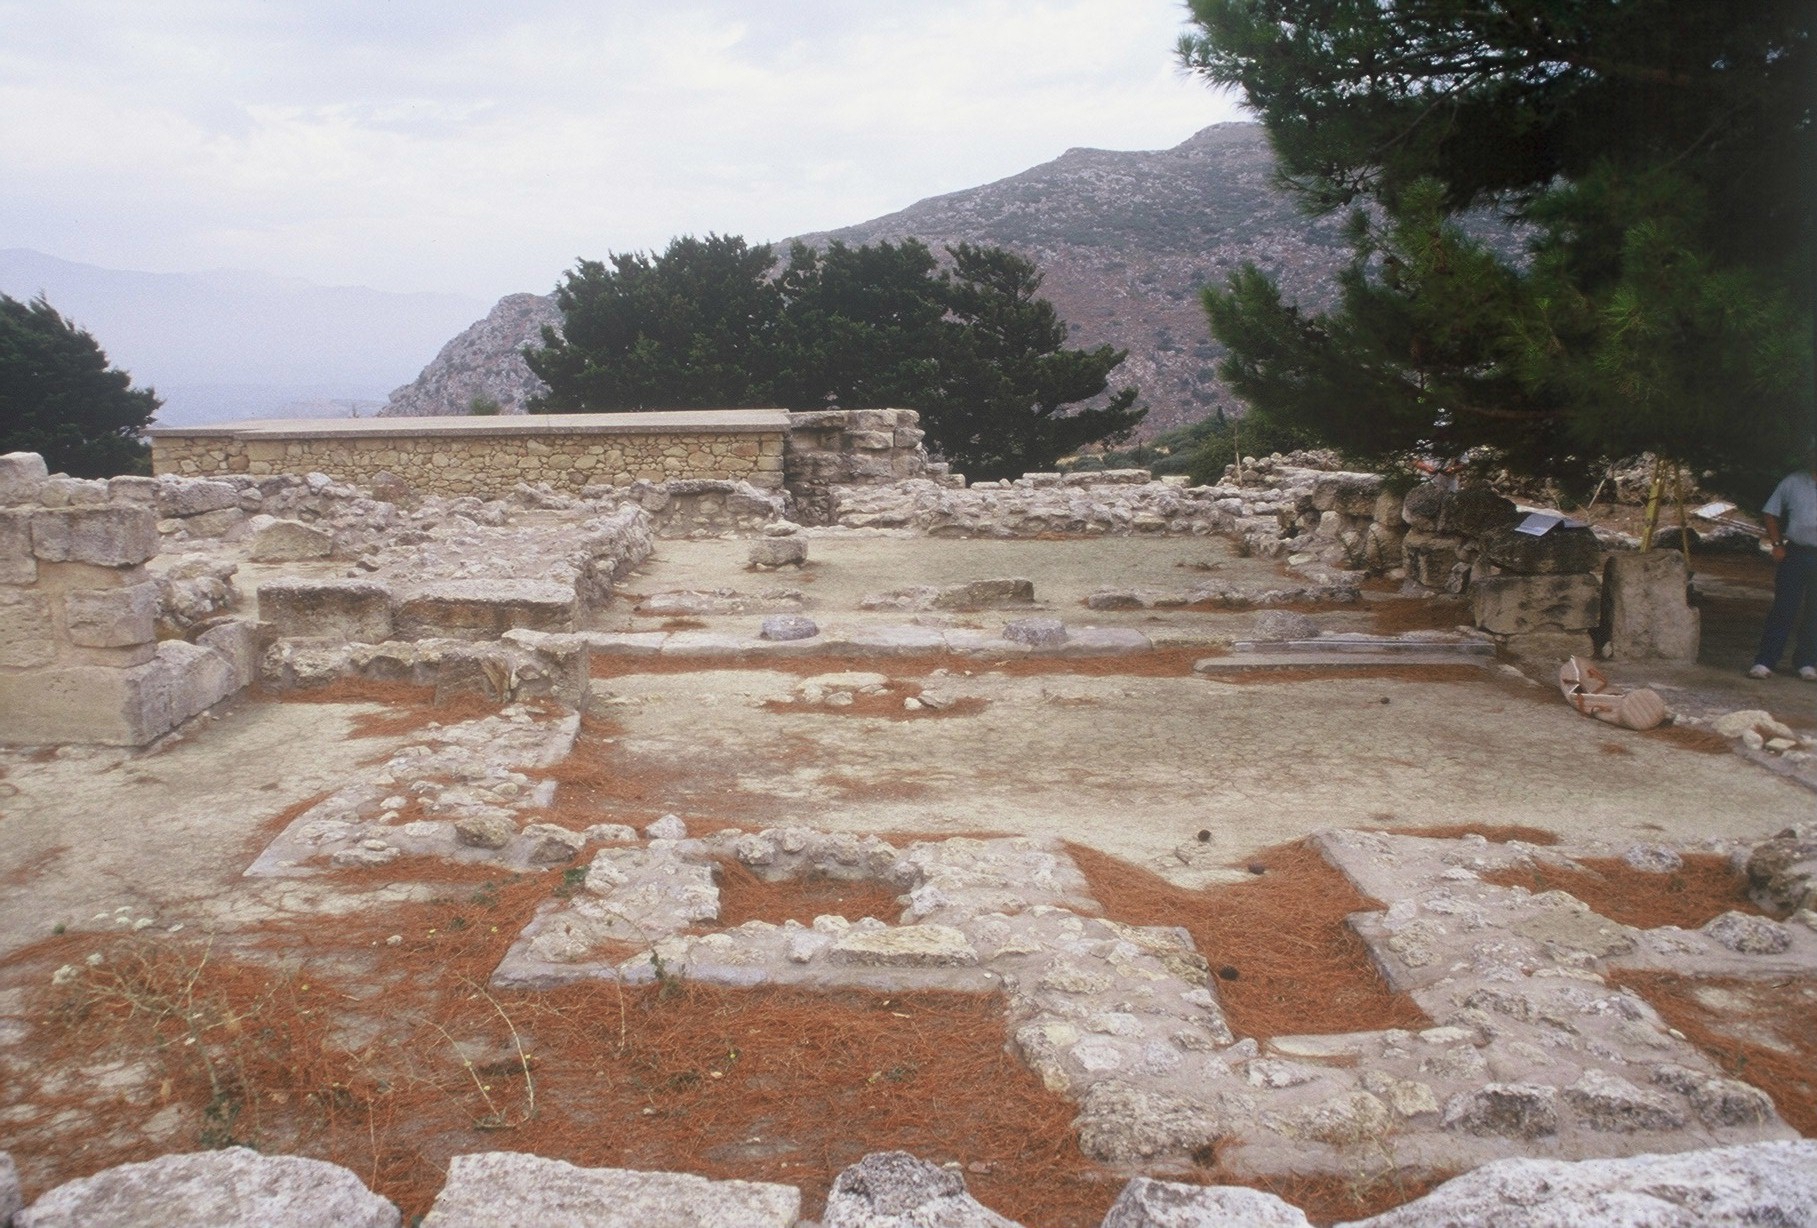 The foundations of the tripartite shrine in the foreground and the pillared hall in the background